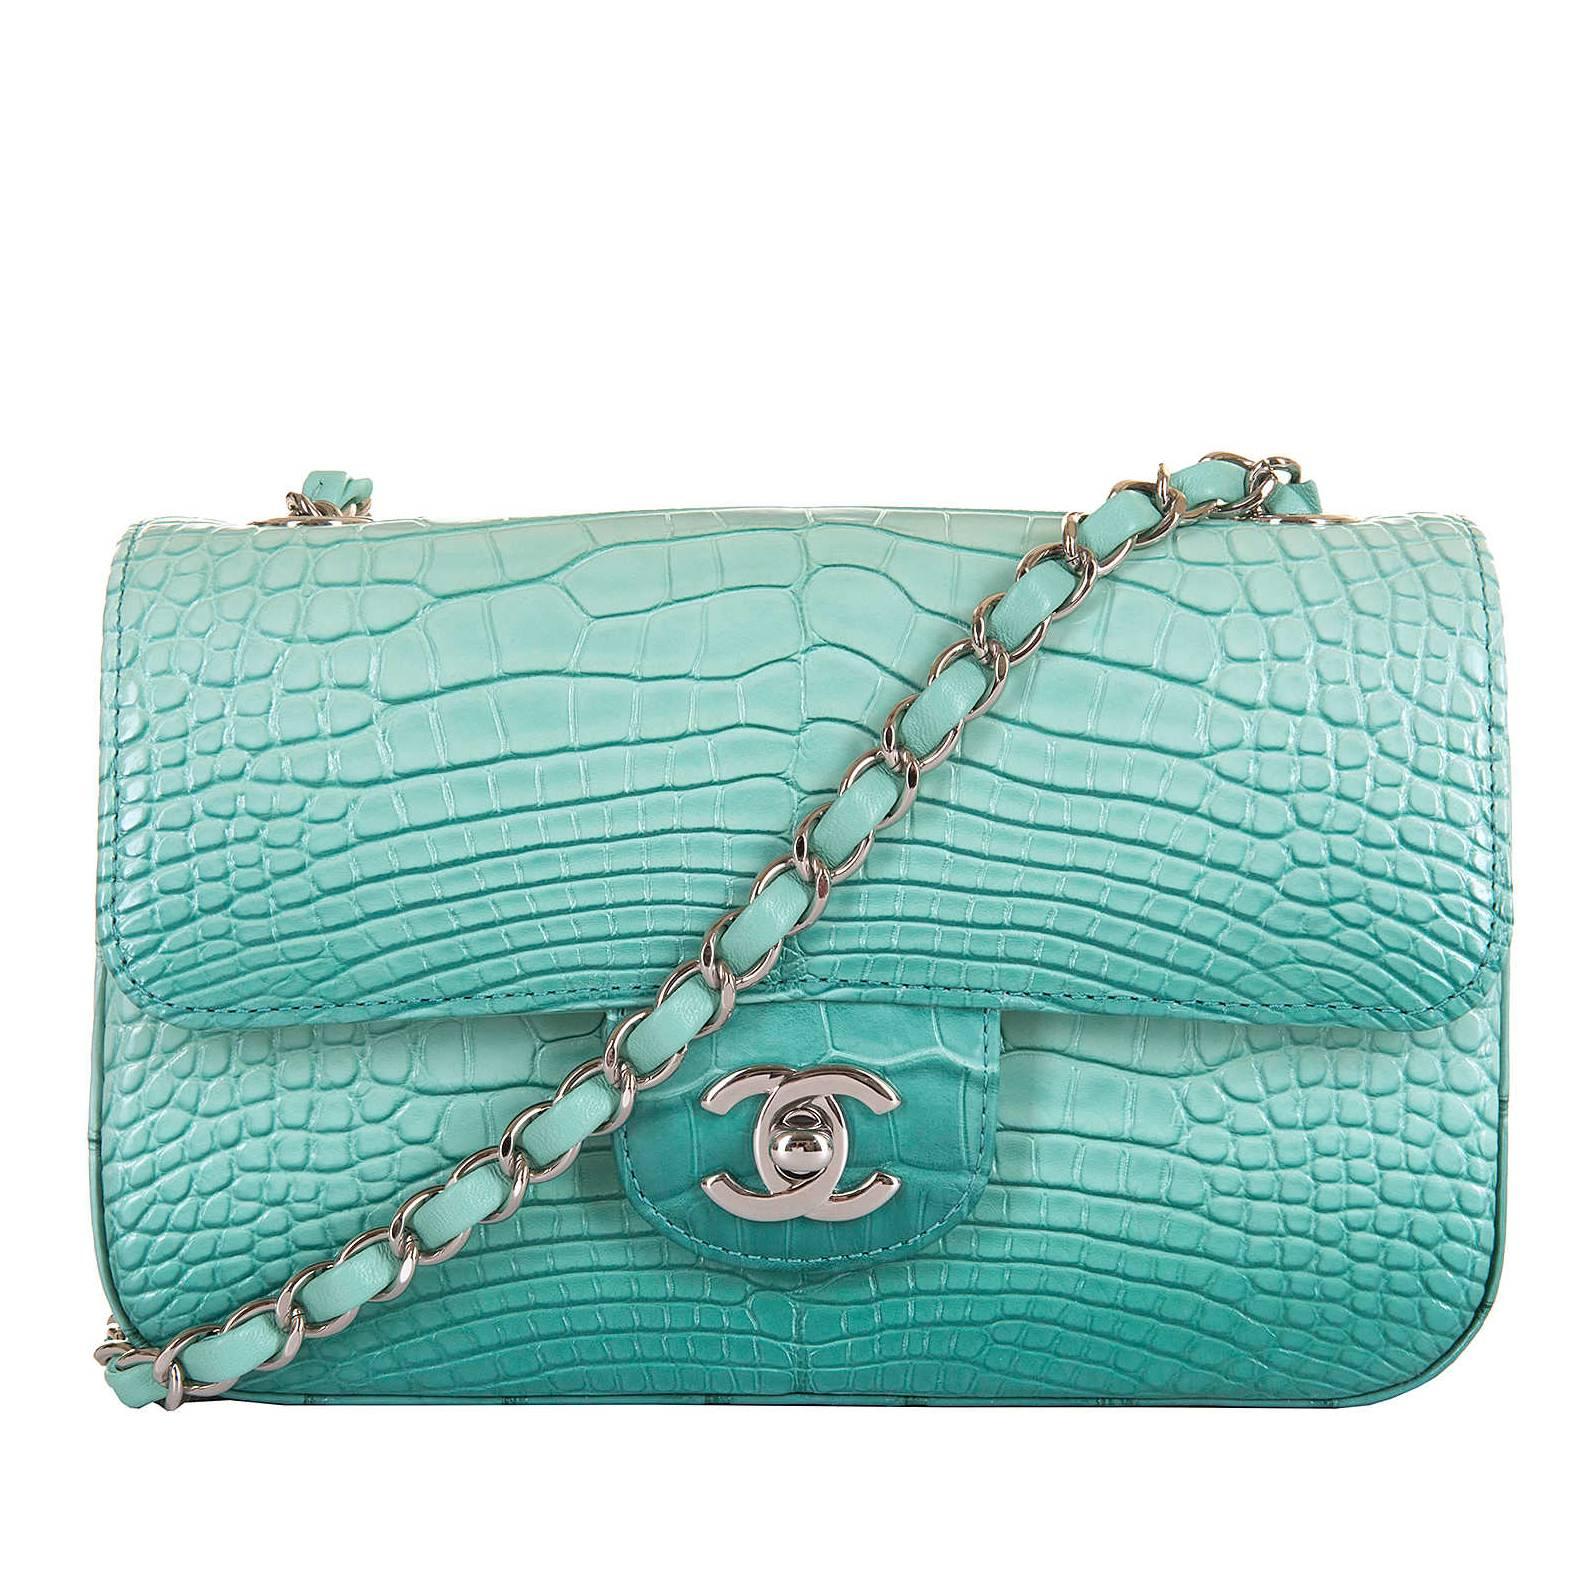 NEW MINI Chanel Turquoise Alligator 'Sac Timeless' Bag with Silver ...